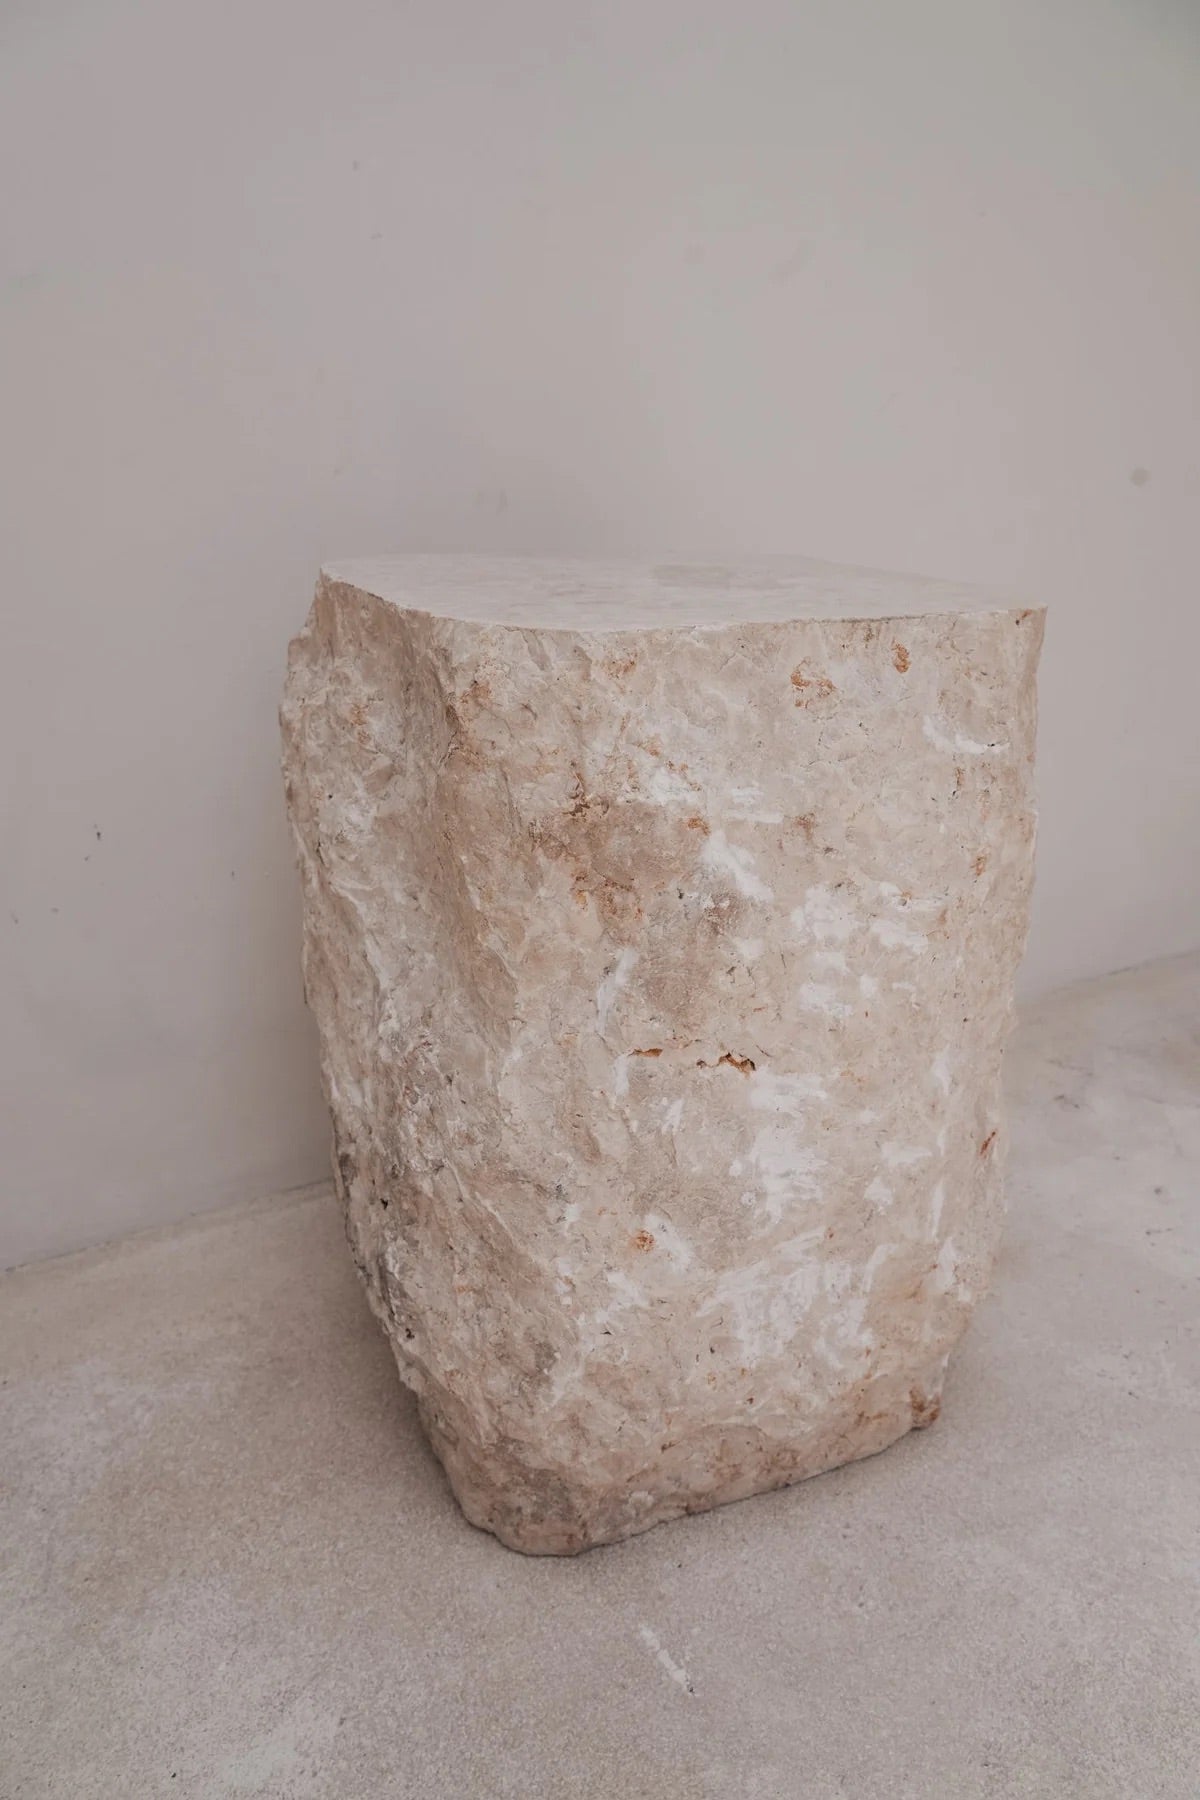 THE RAW STONE STOOL/TABLE